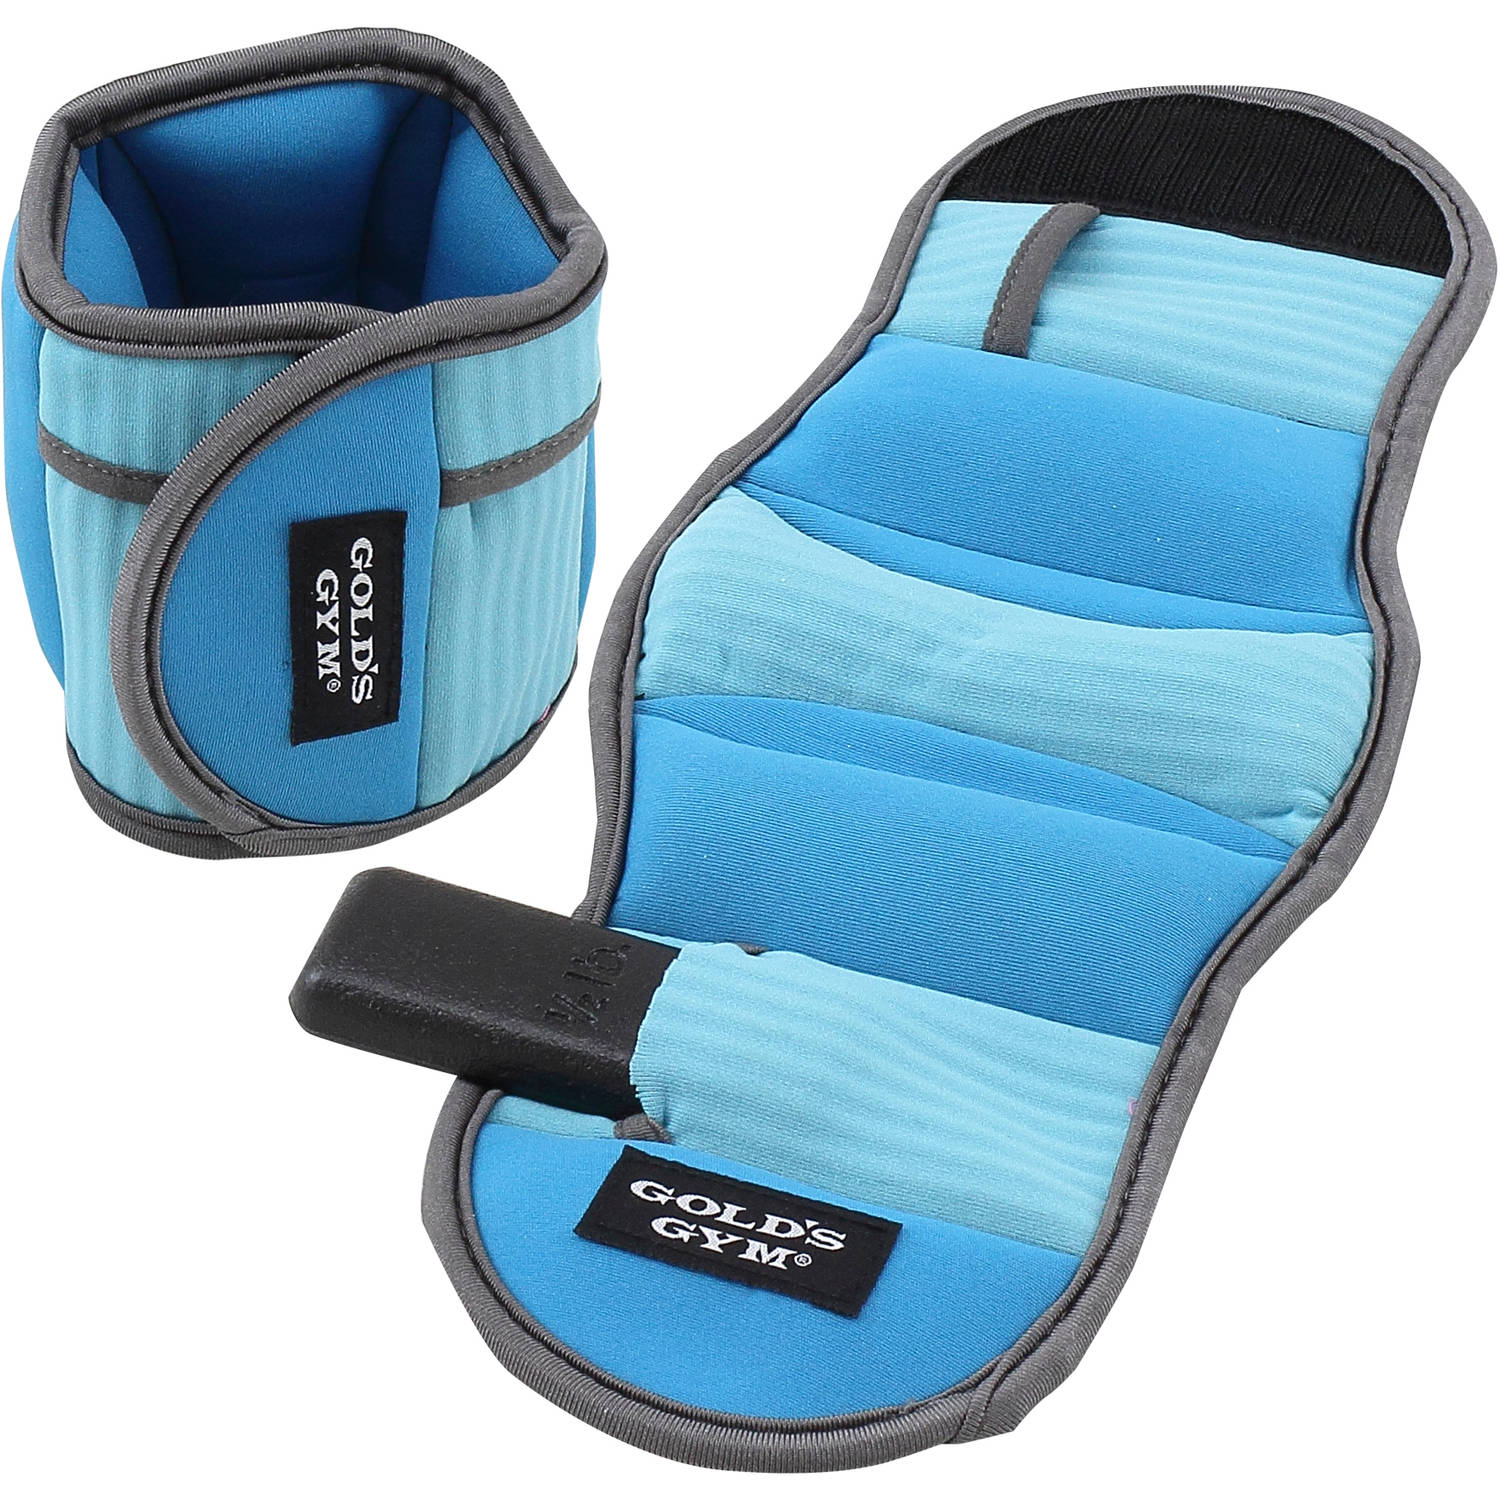 Pool ankle weights